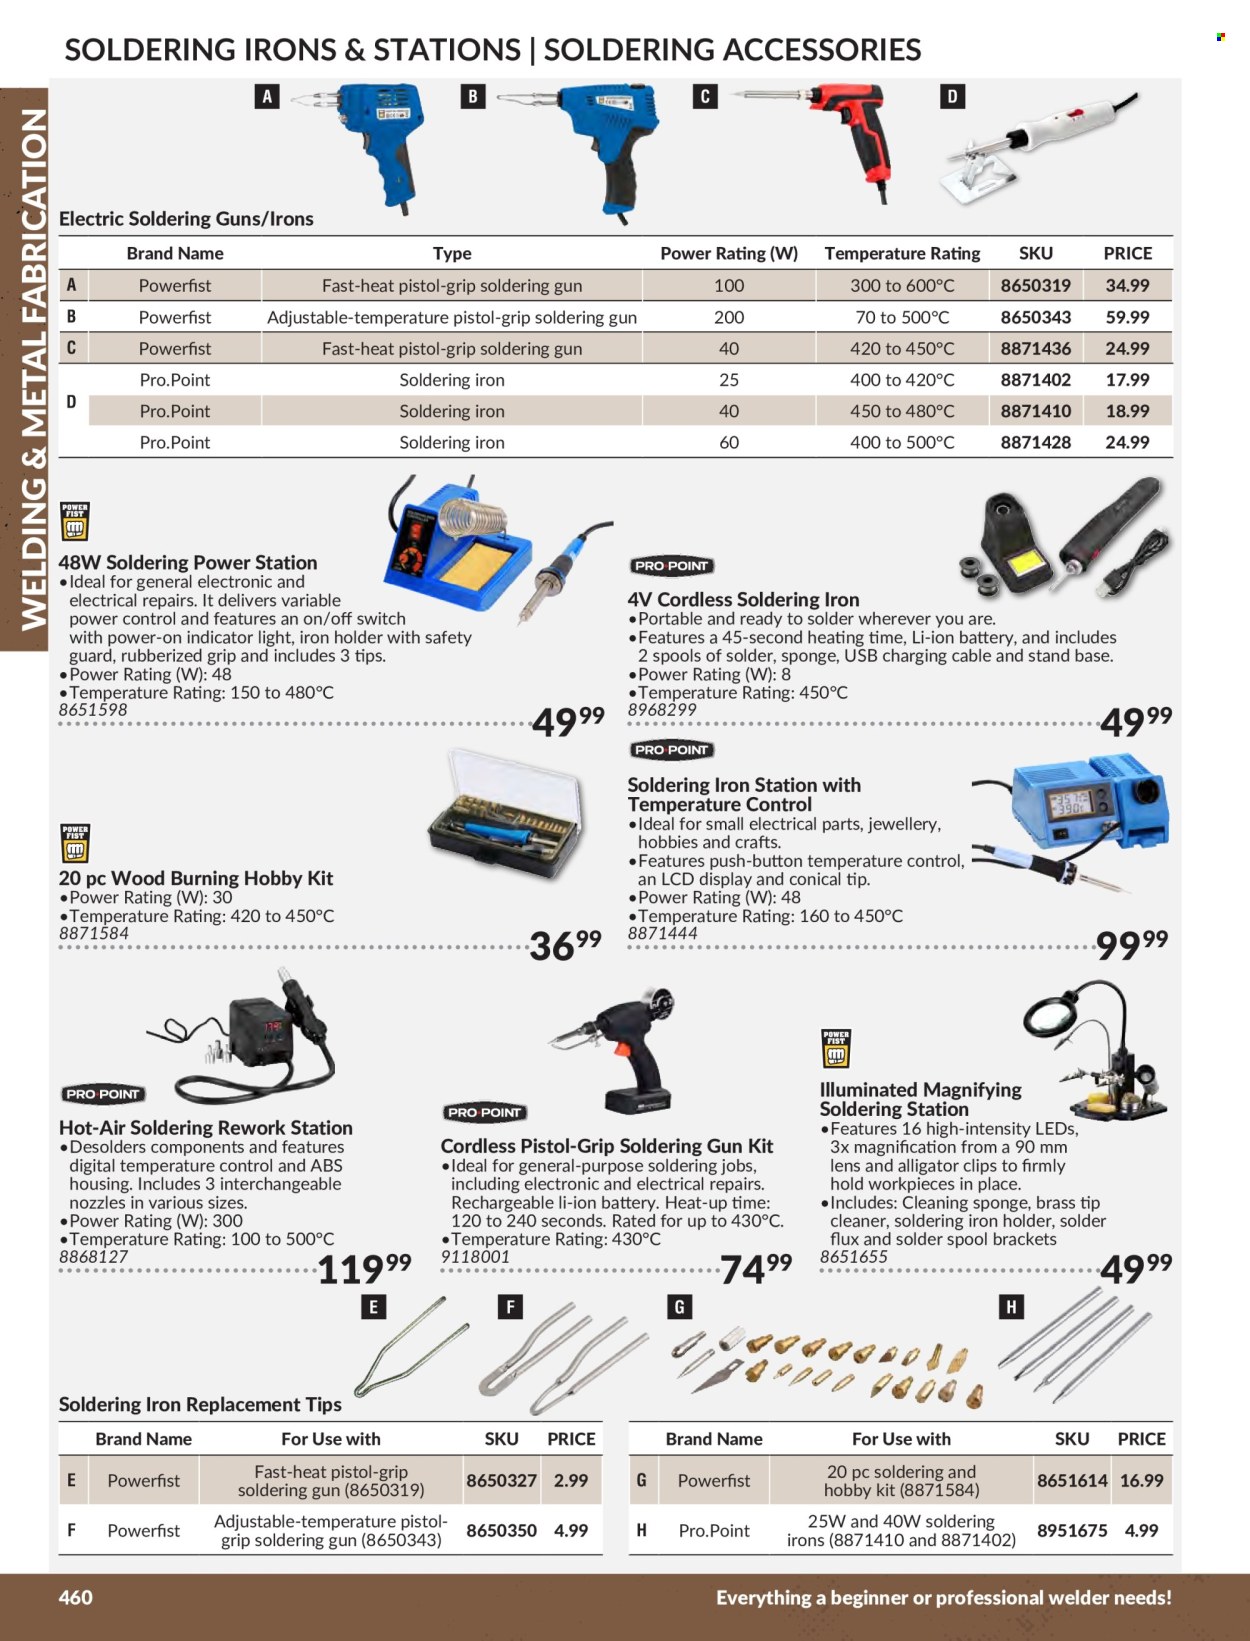 thumbnail - Princess Auto Flyer - Sales products - soldering iron, soldering station, welder, cleaner. Page 466.